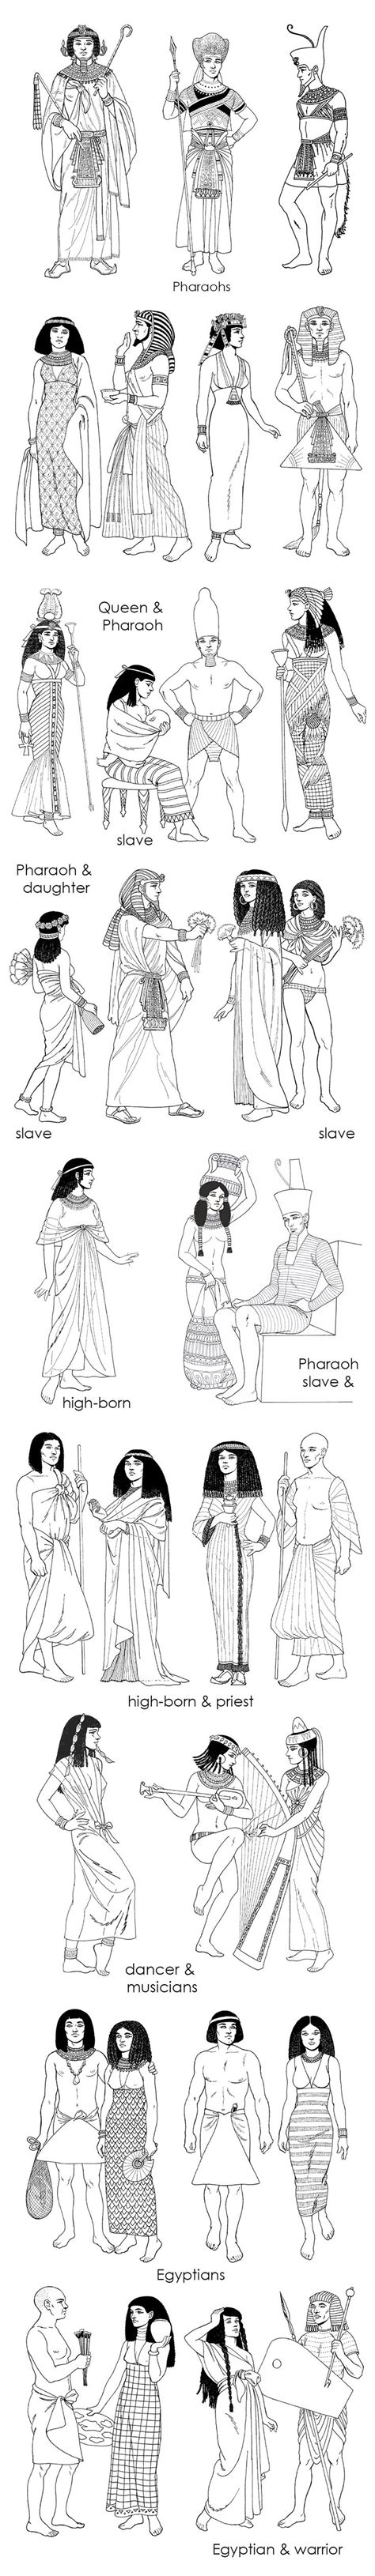 518 Best Images About Egyptian Kemetic On Pinterest